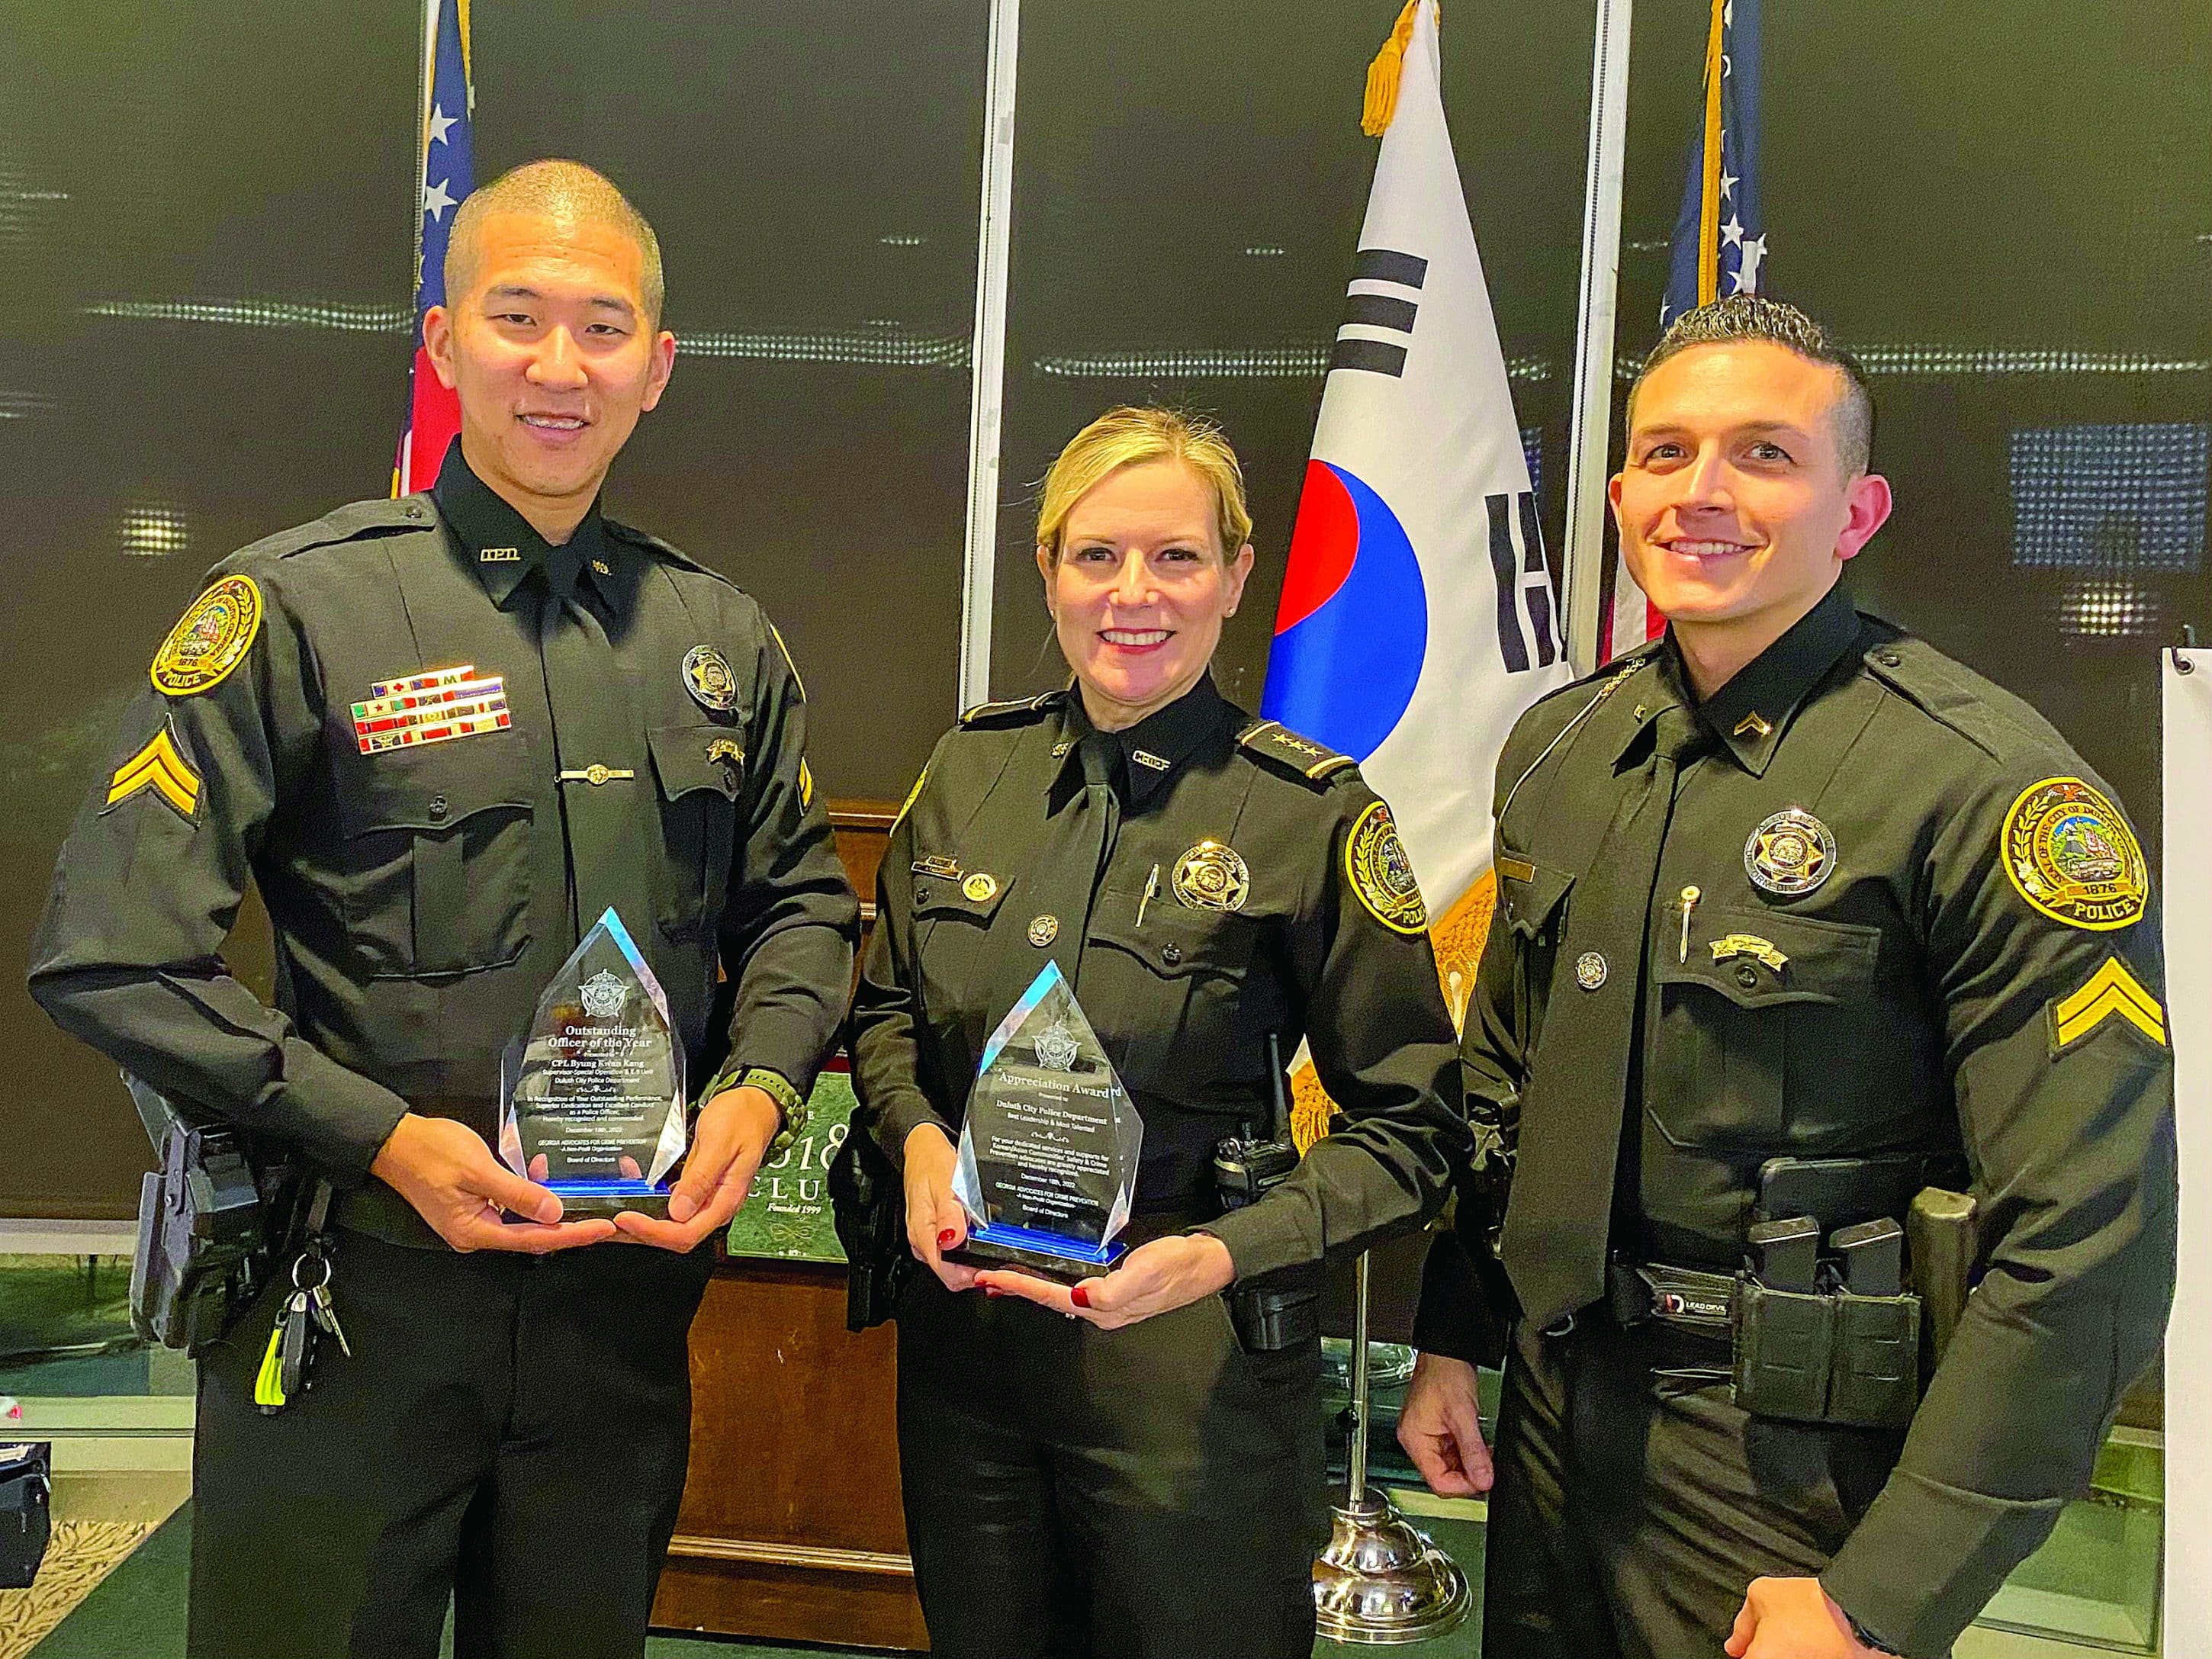 Corporal Byung Kang, Chief Jacquelyn Carruth and Corporal Ted Sadowski receive the awards from Georgia Advocates for Crime Prevention in December.